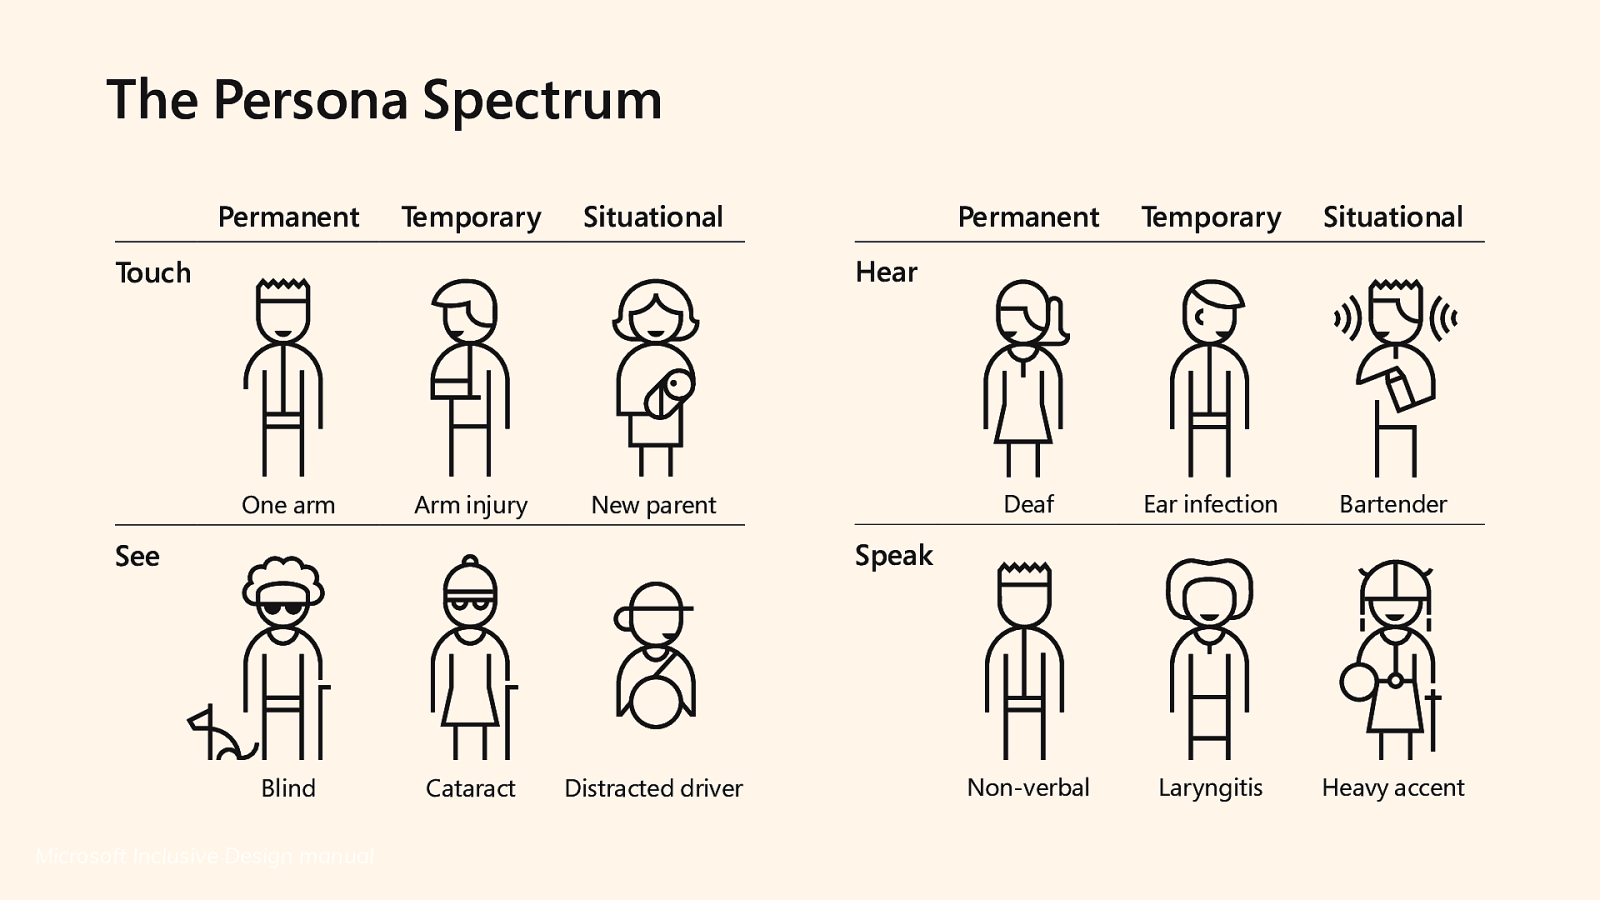 Micrsoft inclusive design personal spectrum, showing how different types of physical disabilities can be caused permanently, temporarily, and situationally.